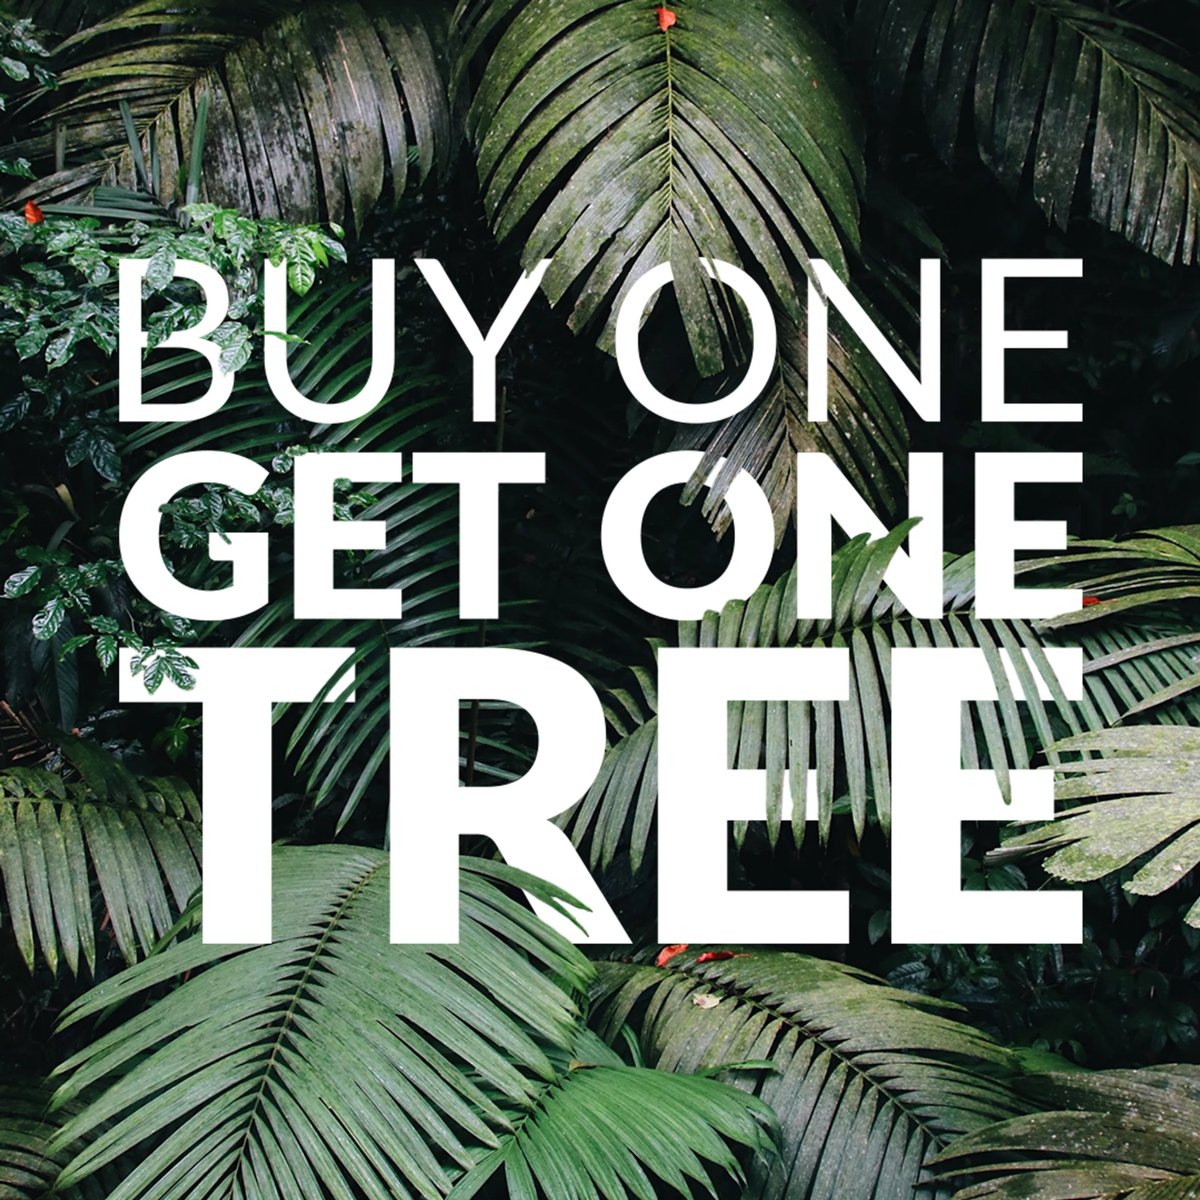 Yes it's that time again! From 9am Friday - midnight on Sunday we fund the planting of a tree with every order! 🌱

You can read more by visiting our blog at spiritanimalclothing.co.uk 🌳

#buyonegetonetree #plantatree #treeplanting #treenation #ecofriendly #loveourplanet